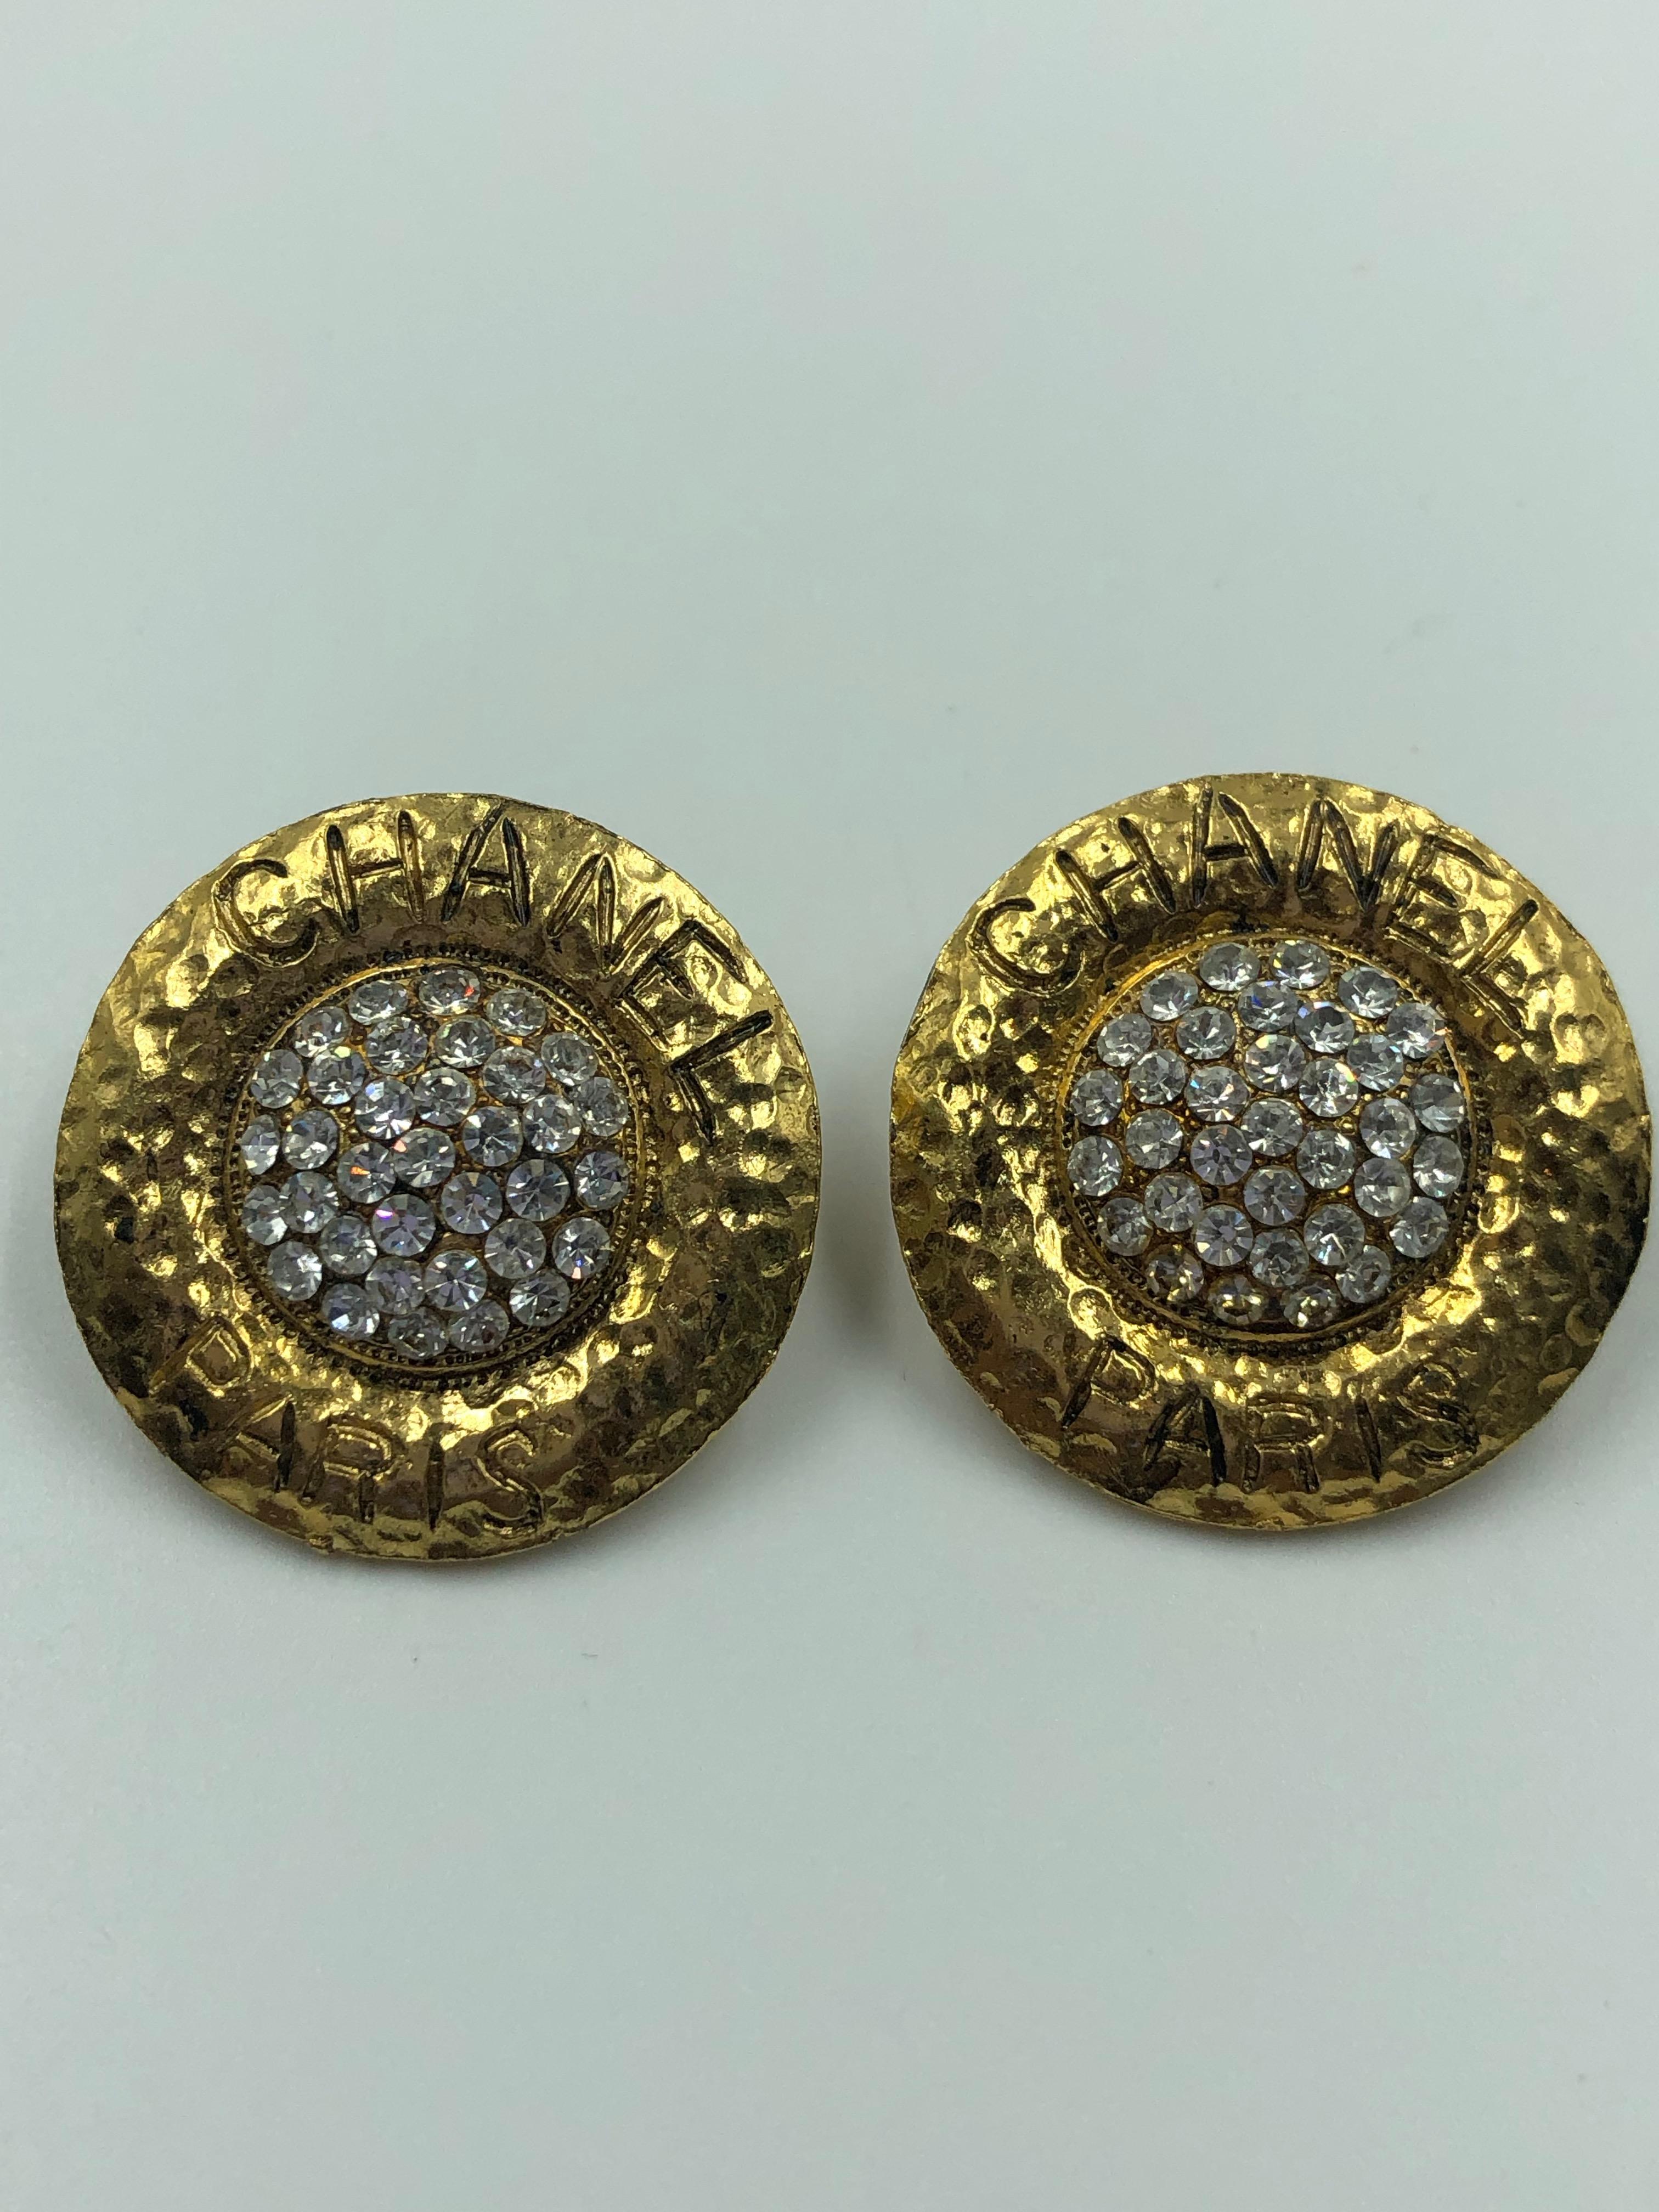 Chanel gold tone earrings with rhinestone accents and 